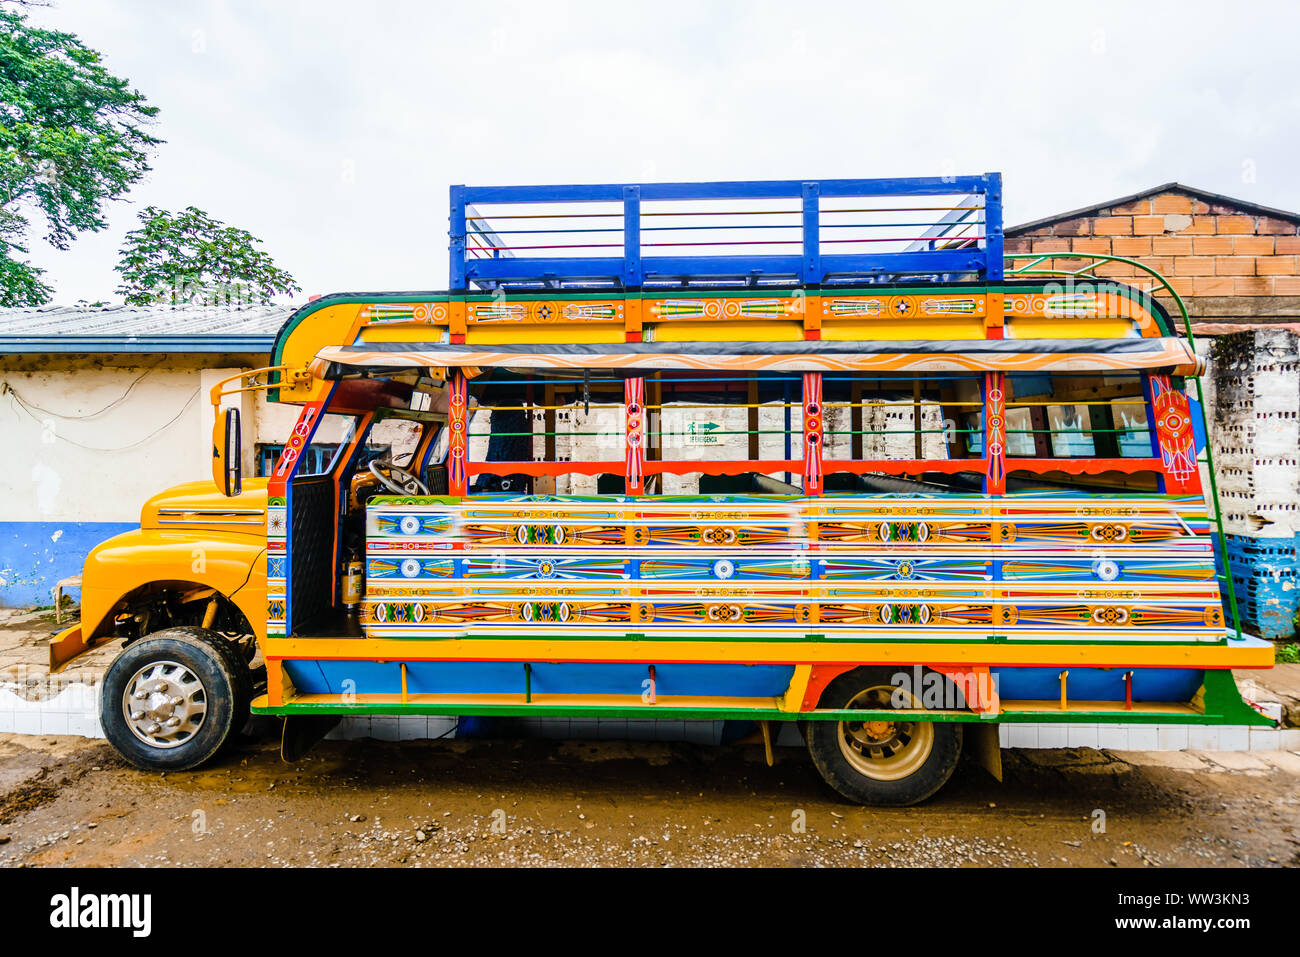 View on Typical colorful chicken bus near Jerico Antioquia, Colombia, South America Stock Photo